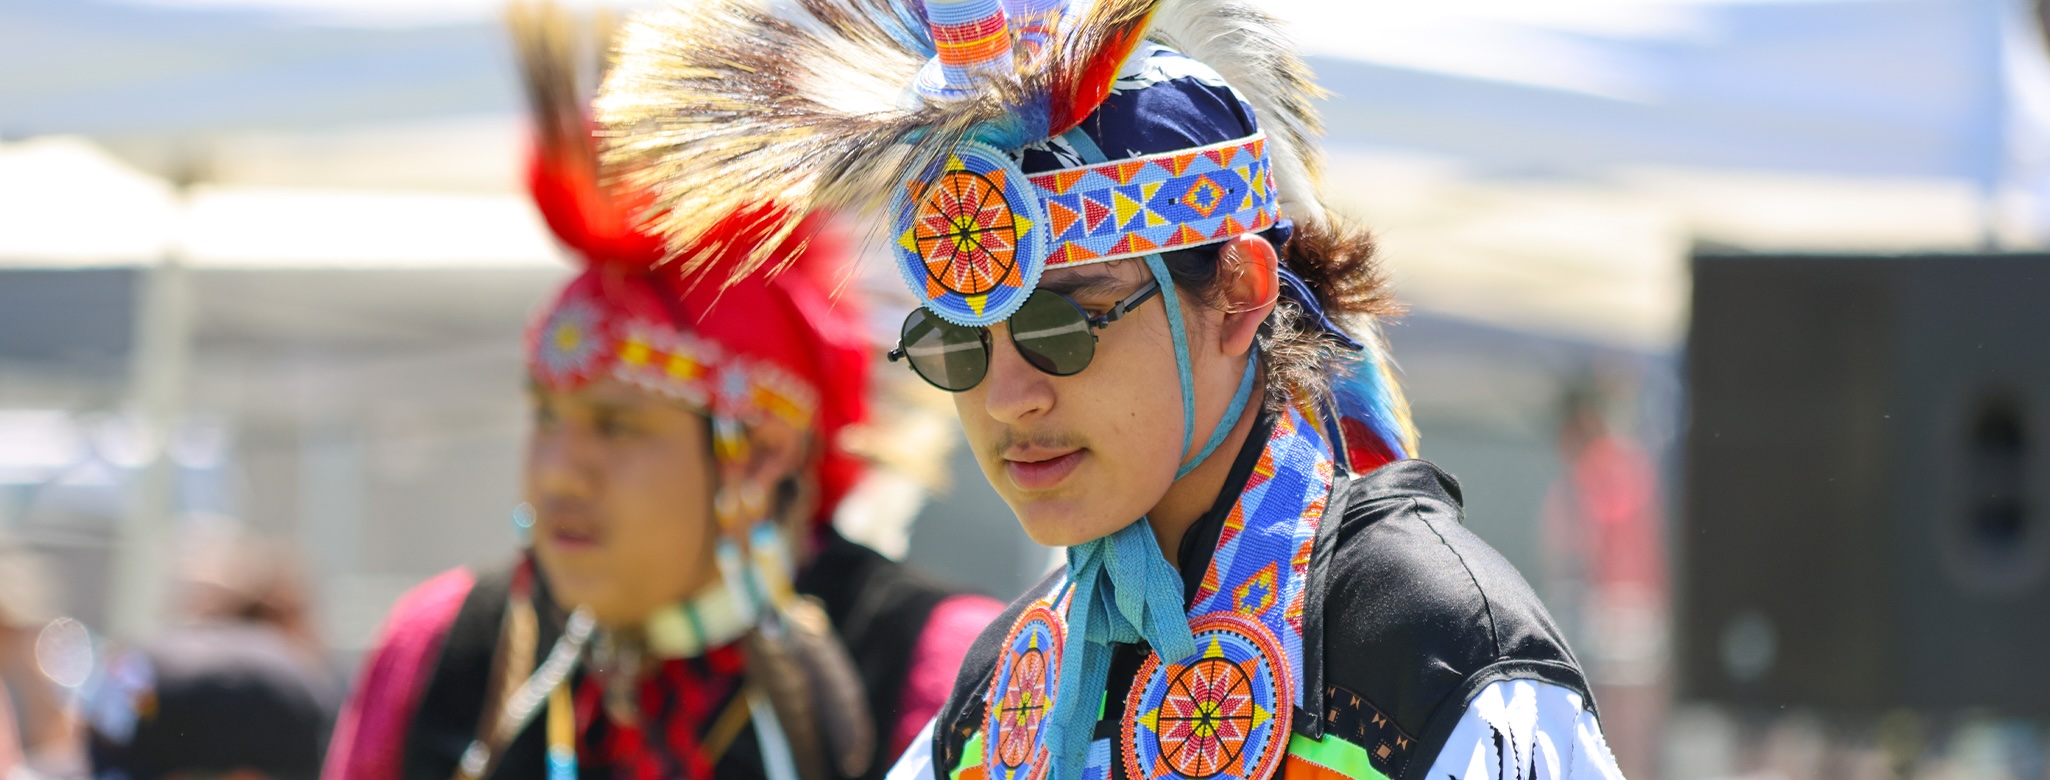 Person dressed in cultural clothing for Pow Wow event.